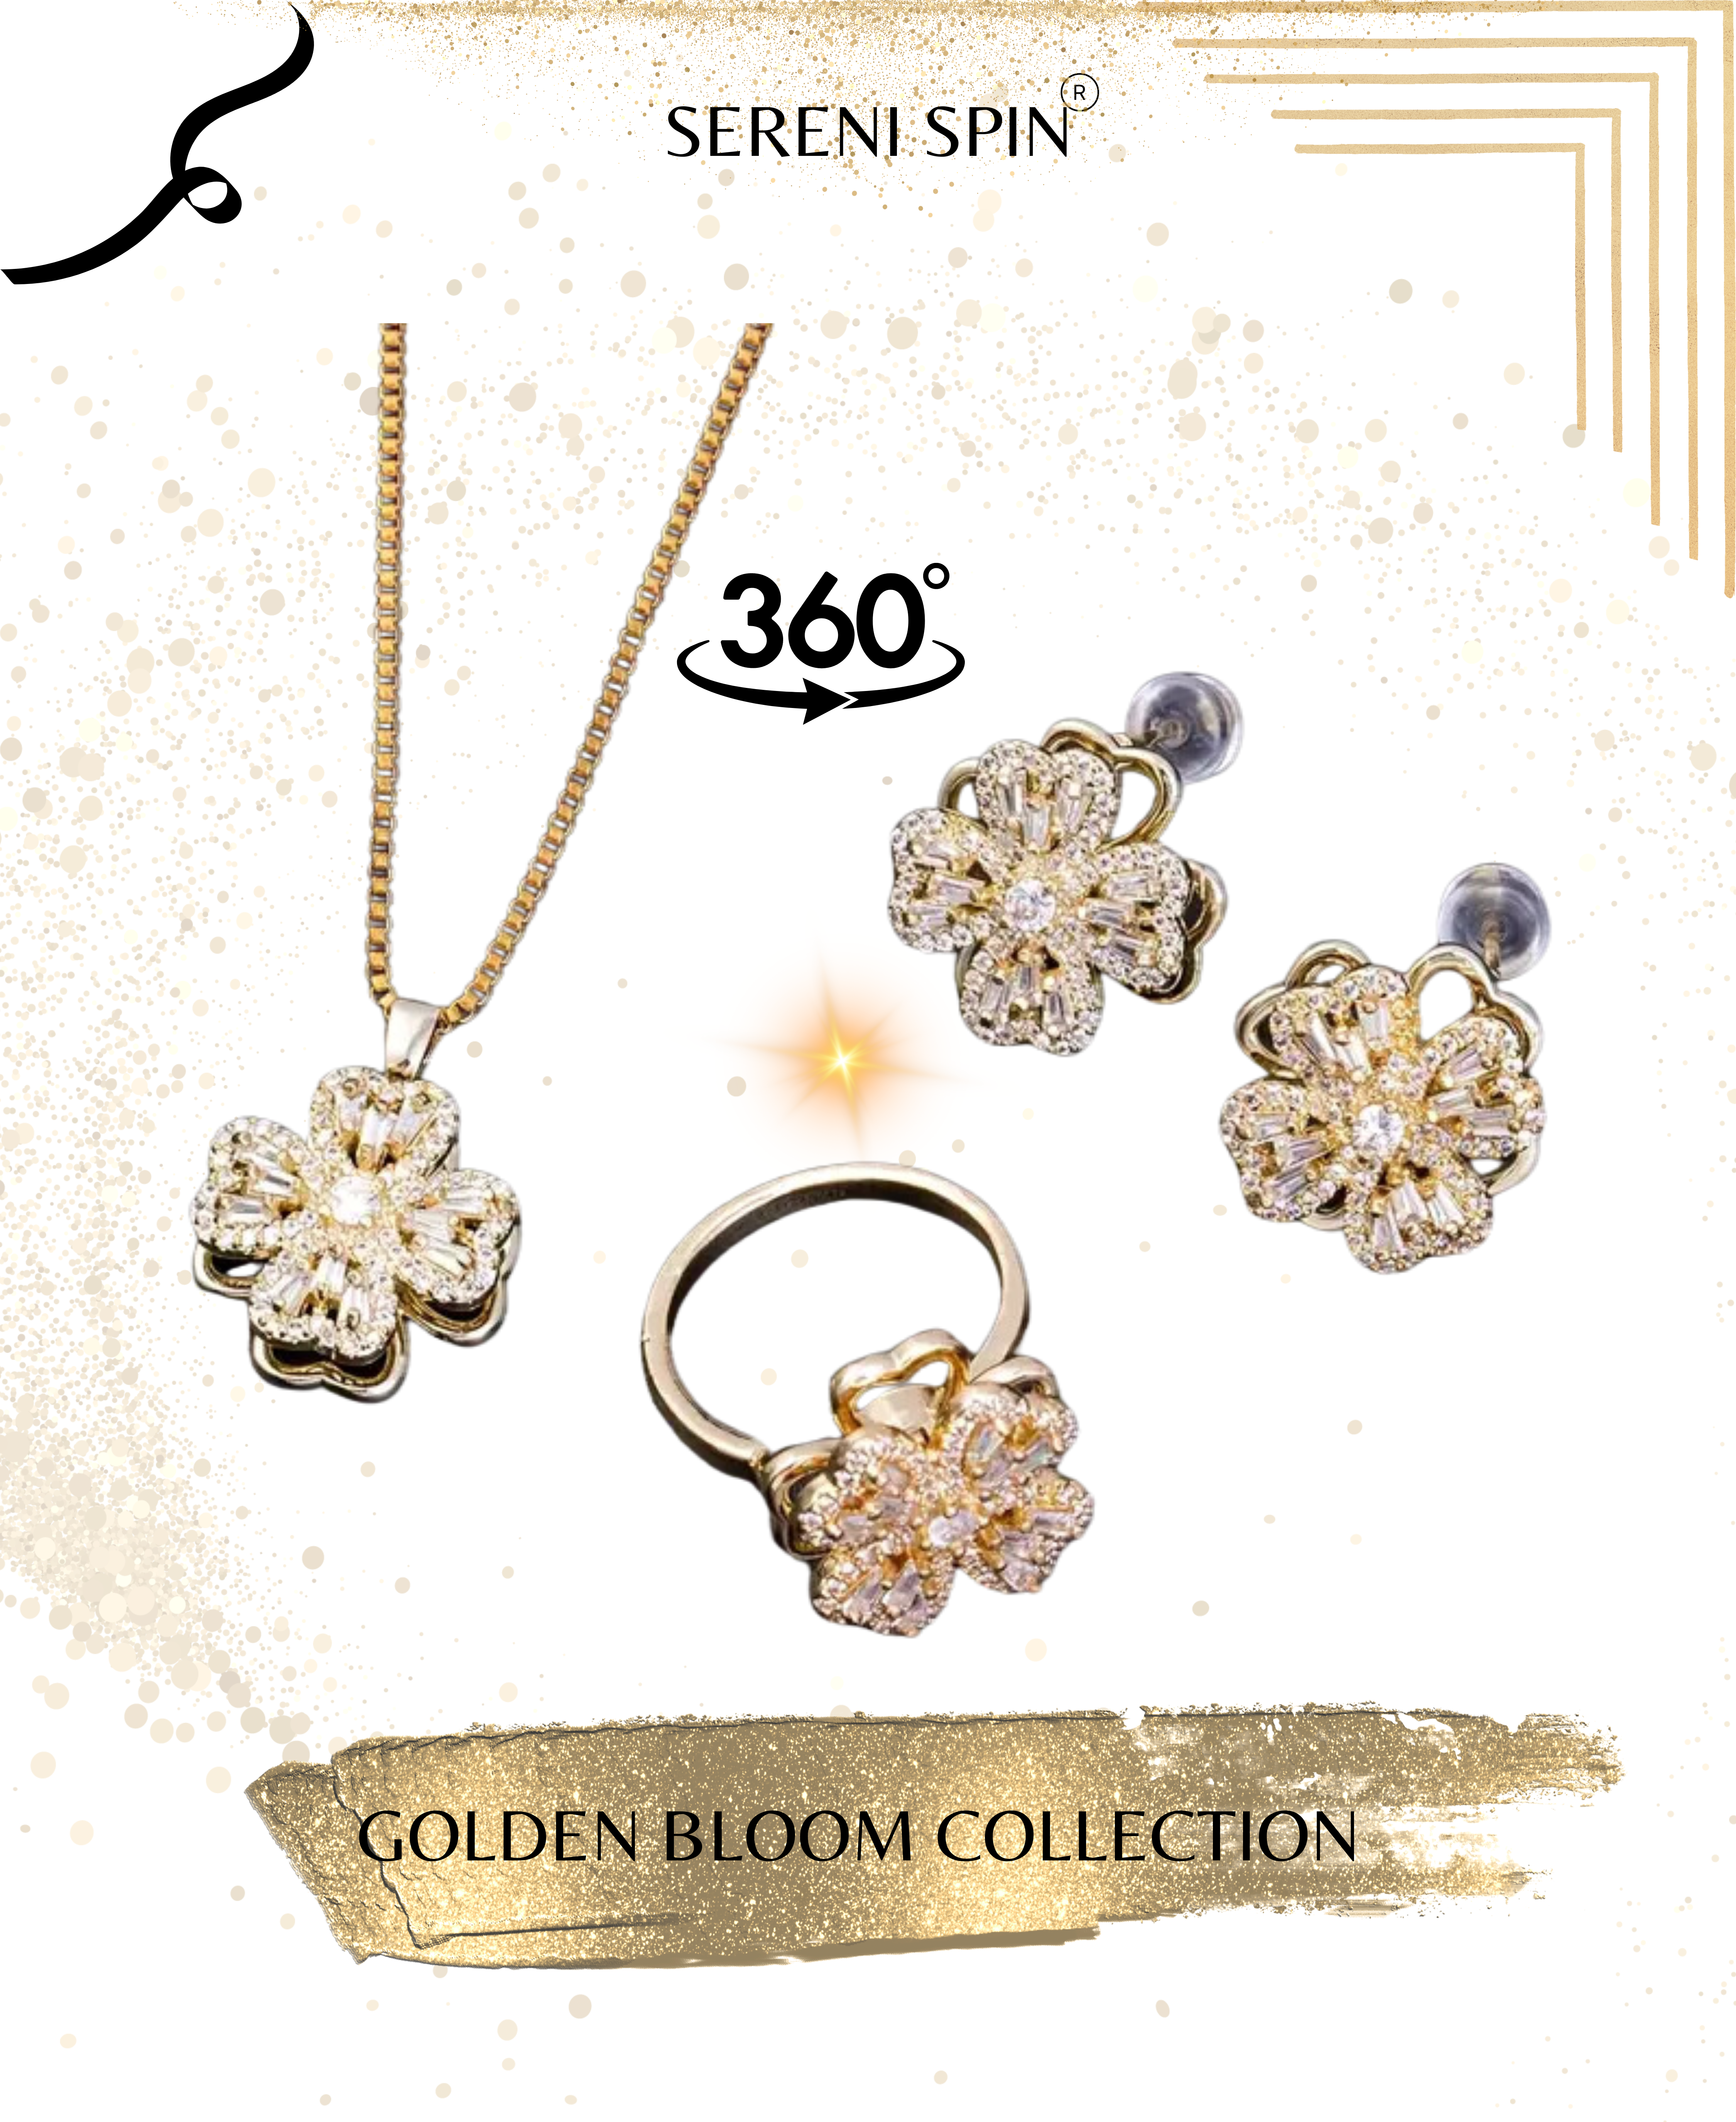 Golden Bloom Collection: Radiance in Harmony 🌼